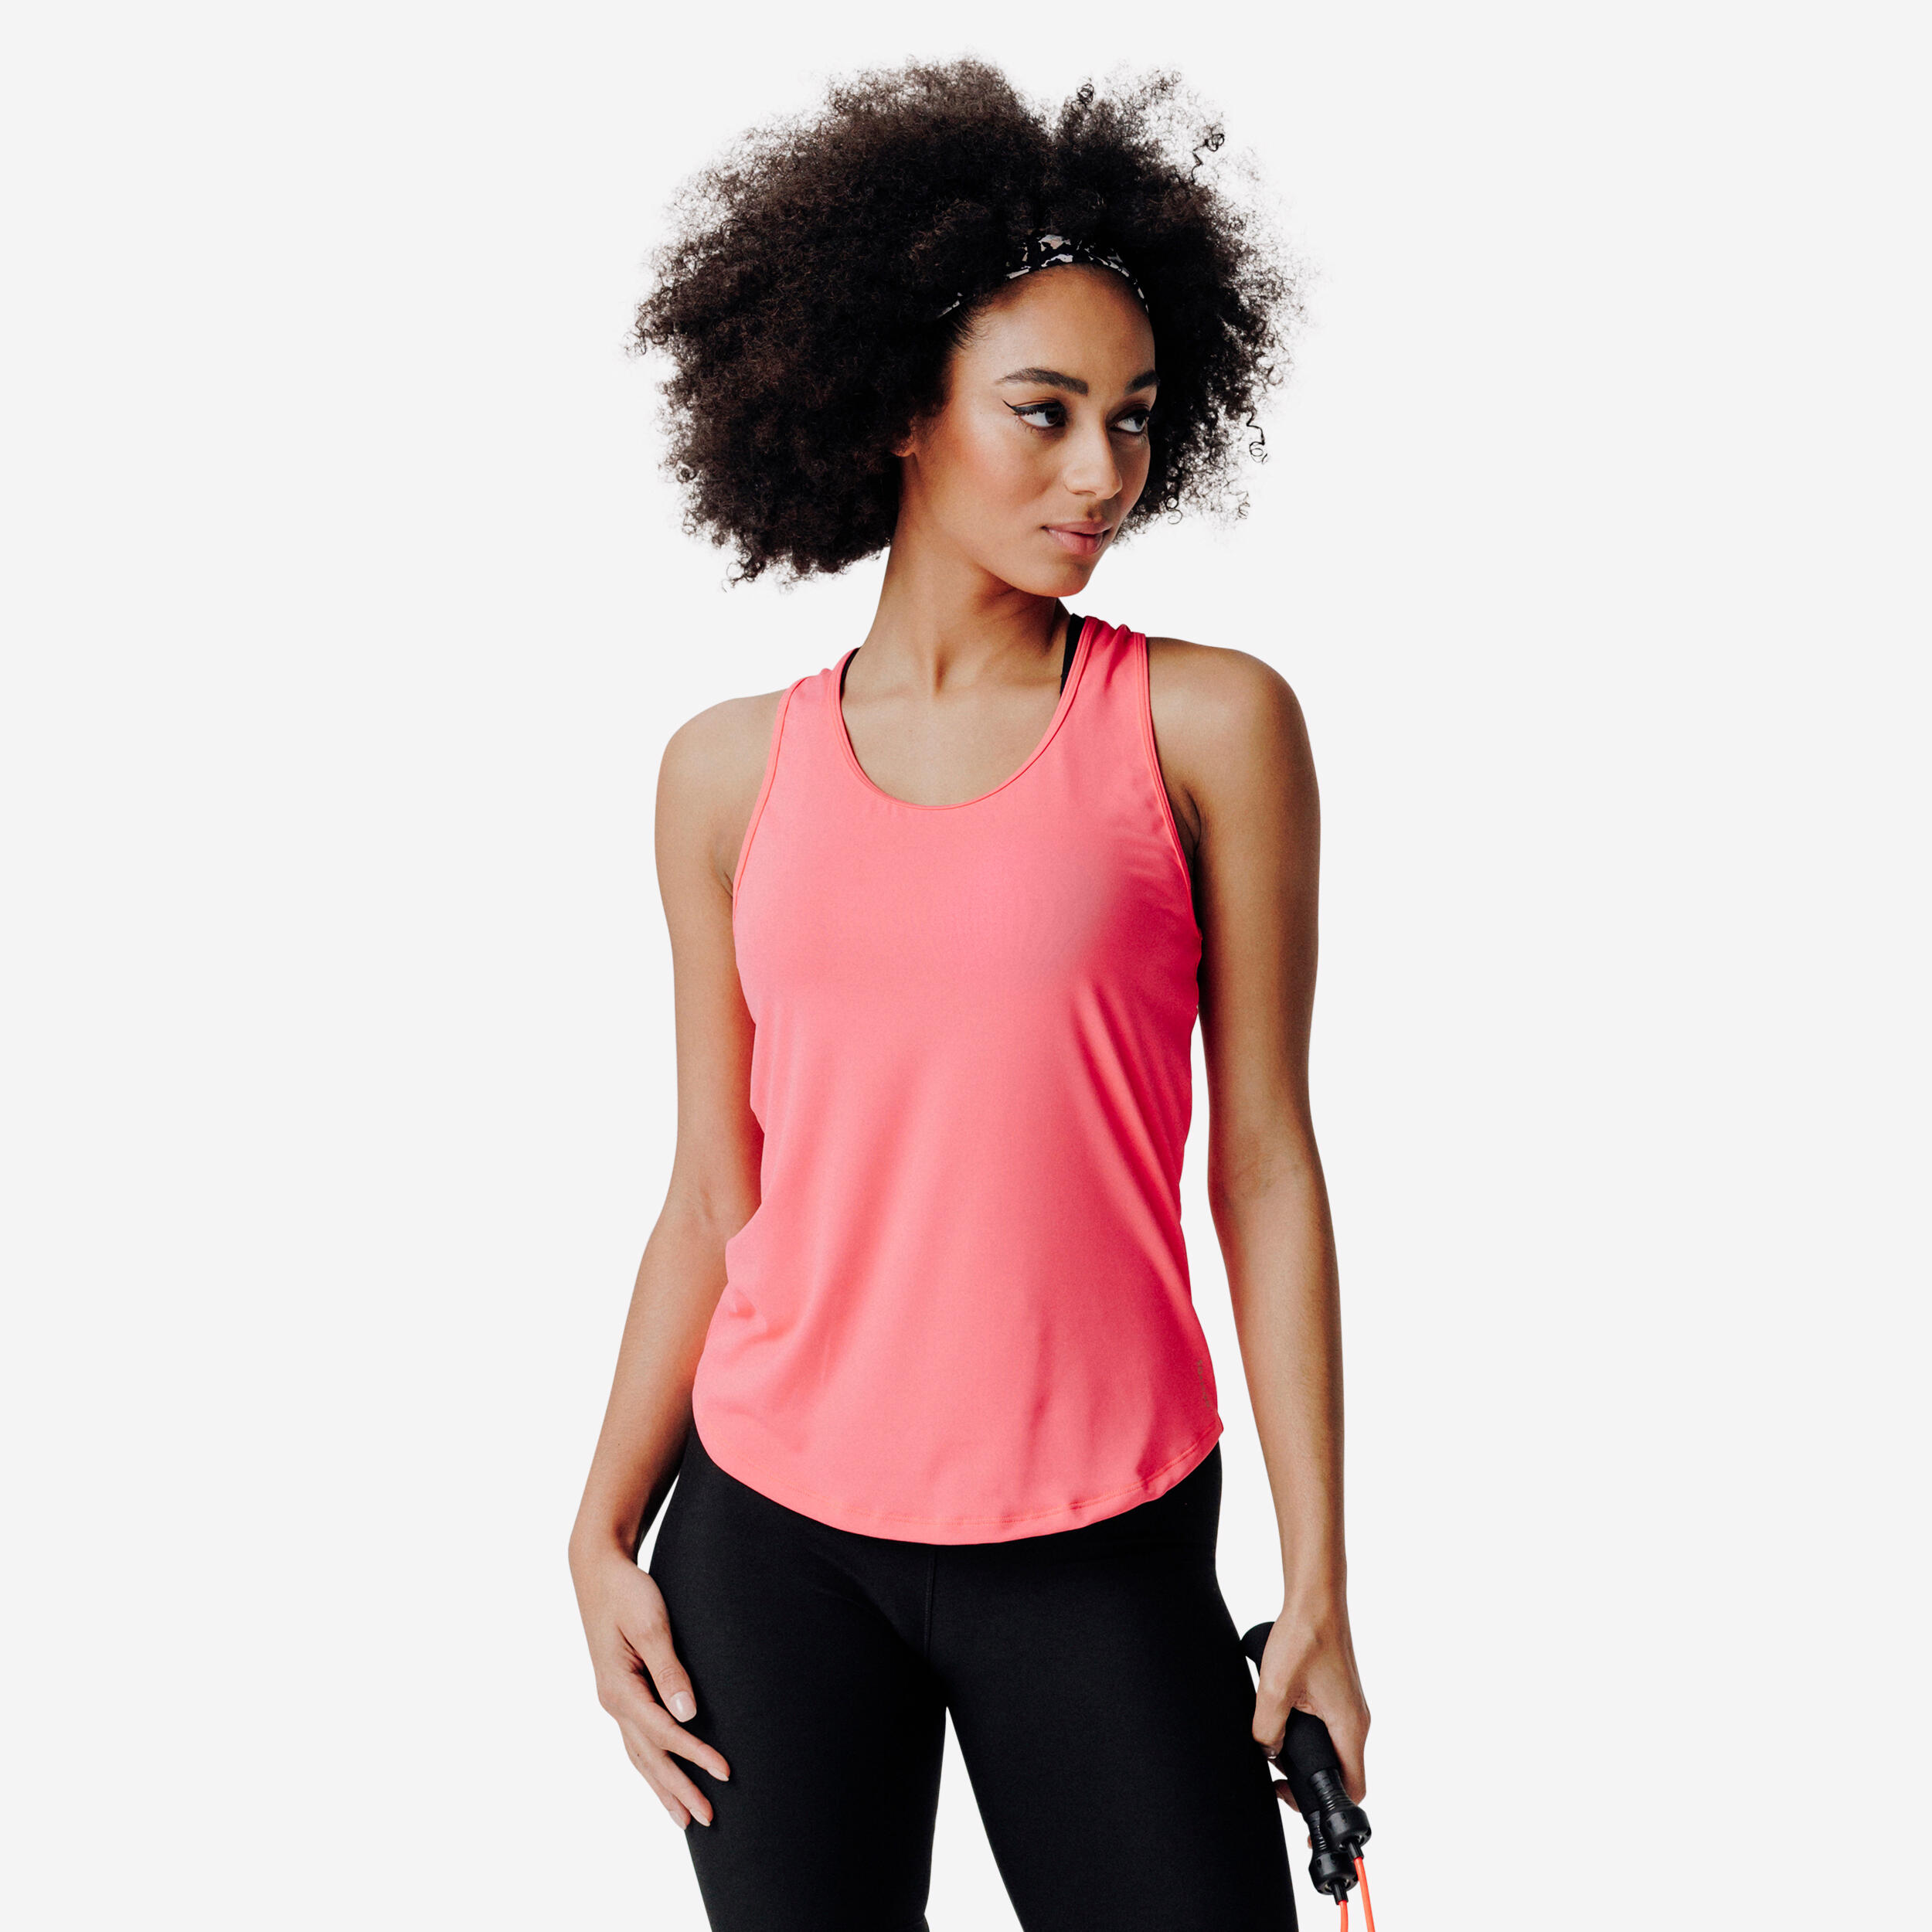 Women's Muscle Back Fitness Cardio Tank Top My Top - Pink 1/5